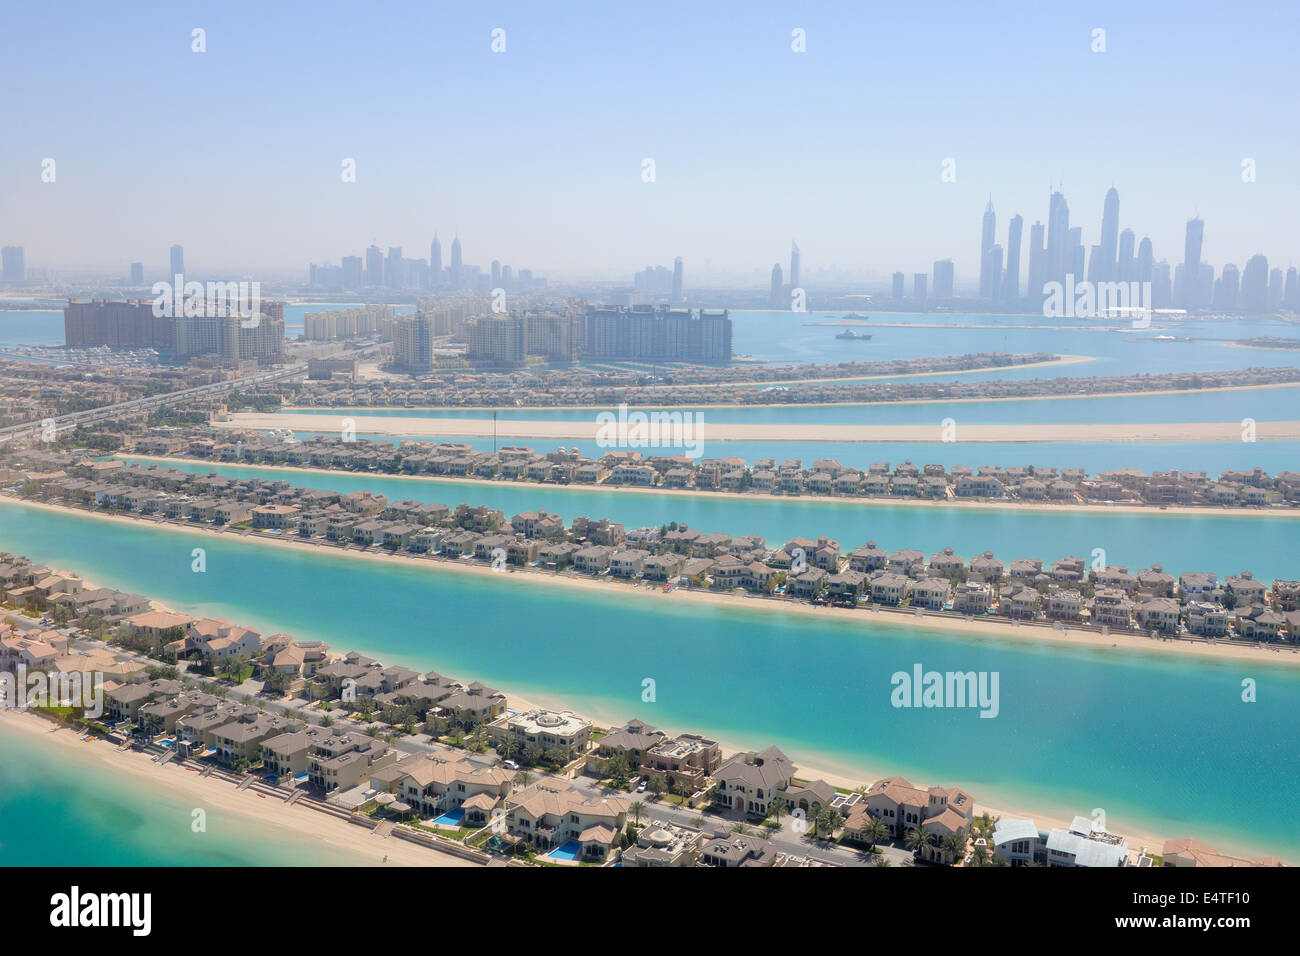 Aerial View of Palm Jumeirah with Skyscrapers in the background, Palm Islands, Dubai, United Arab Emirates Stock Photo